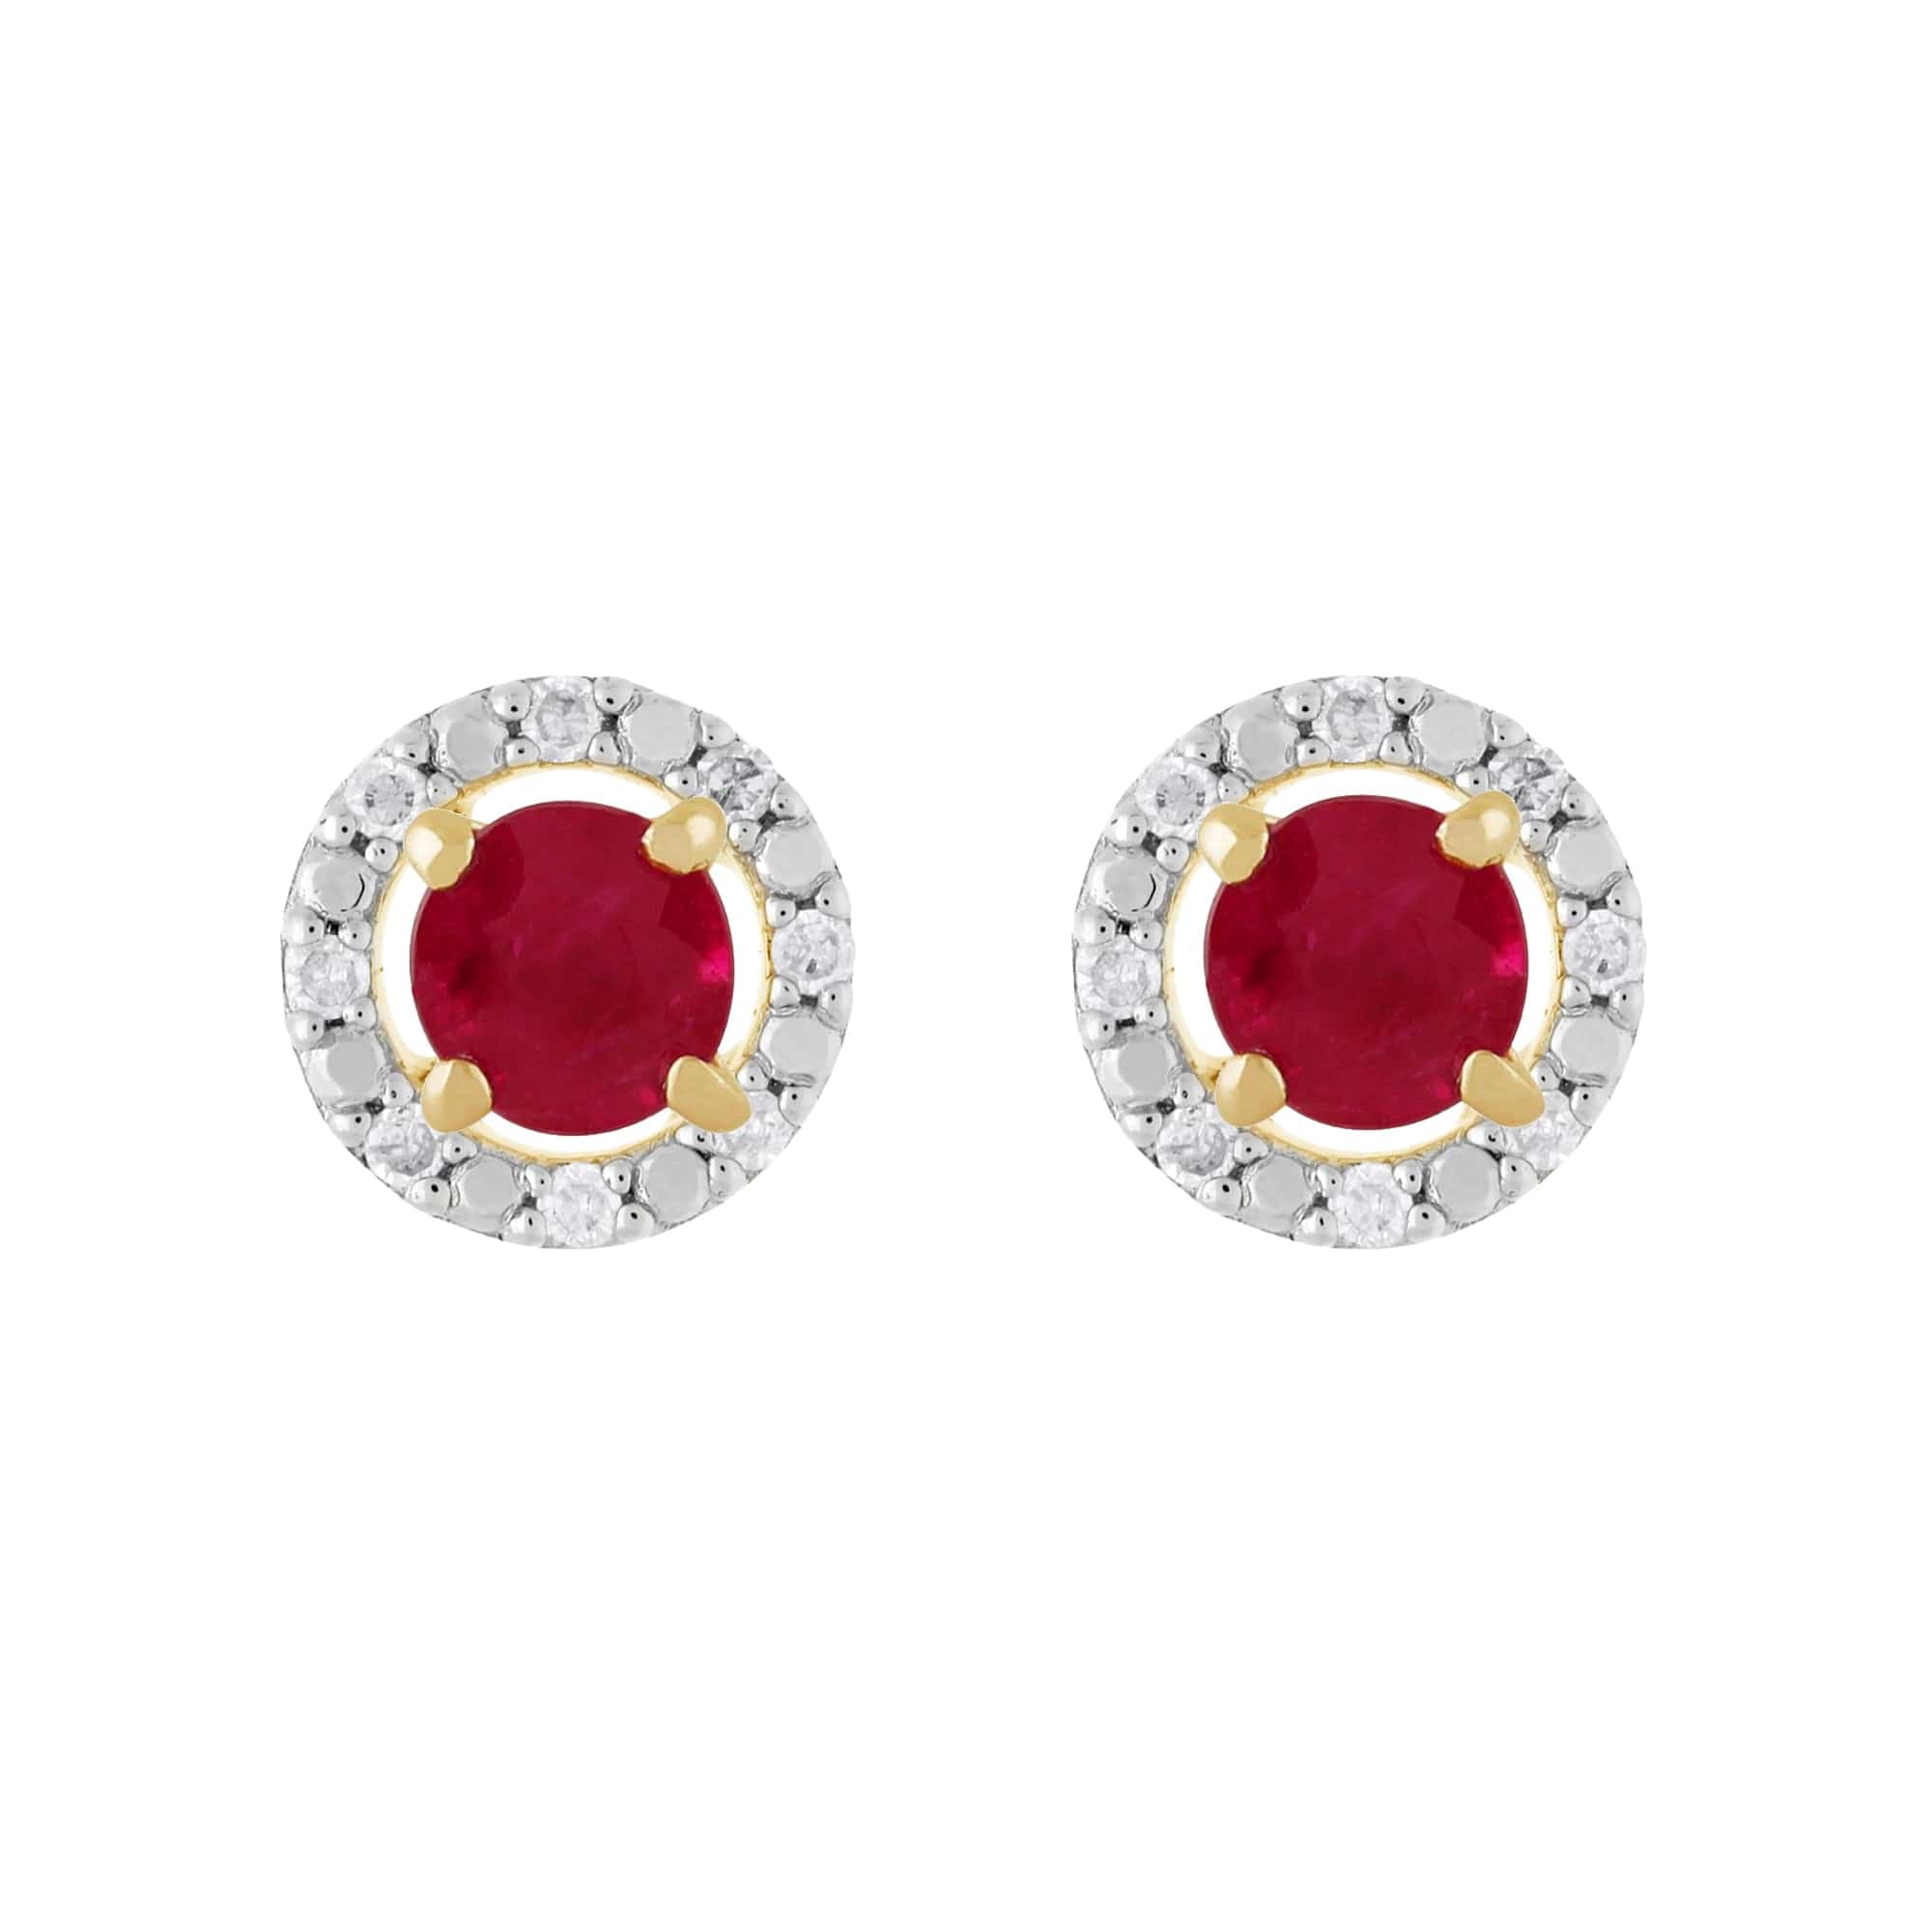 11570-191E0376019 Classic Round Ruby Stud Earrings with Detachable Diamond Round Earrings Jacket Set in 9ct Yellow Gold 1